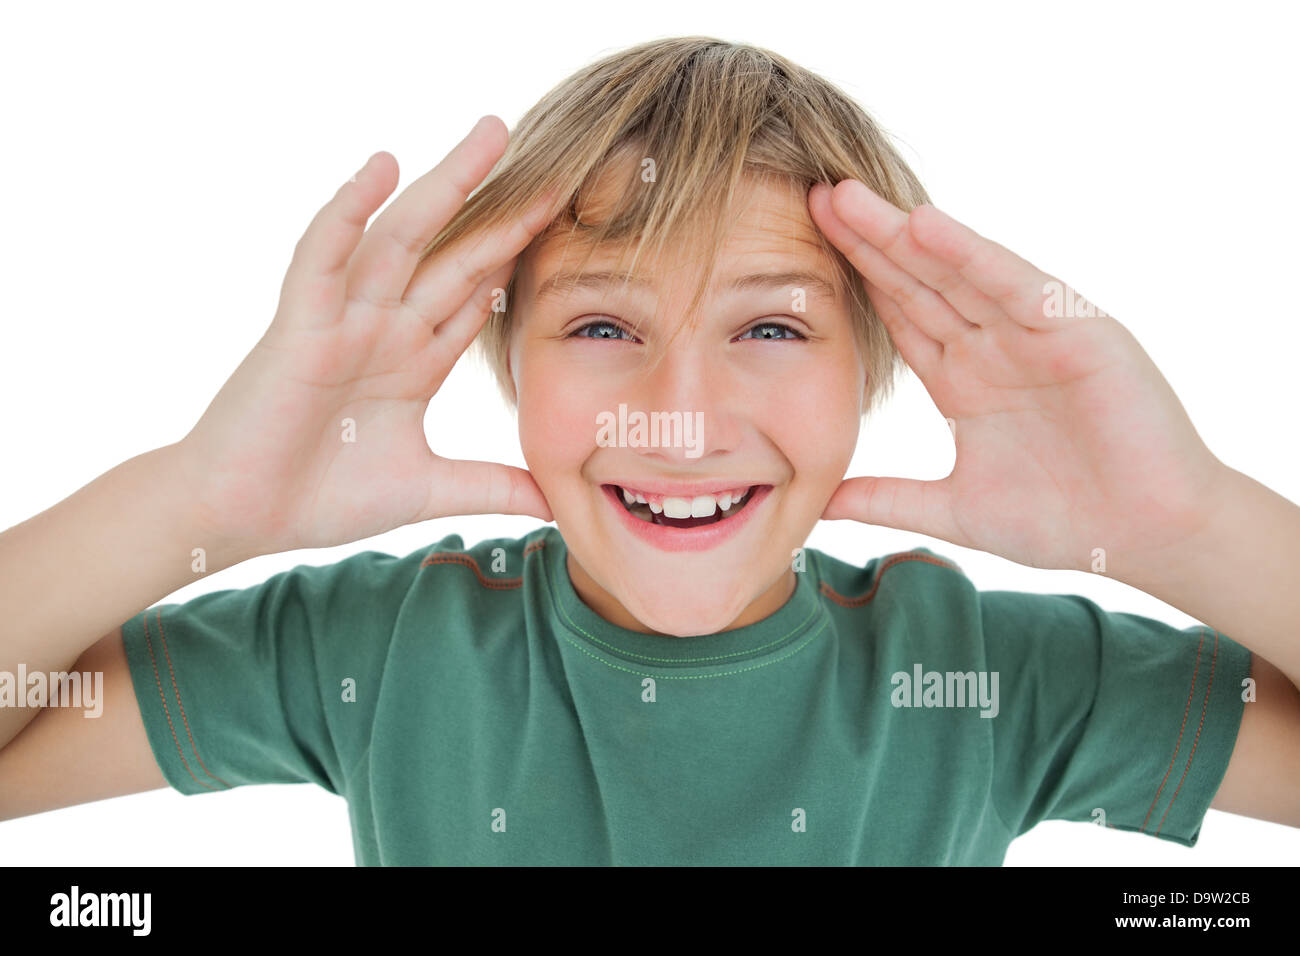 Surpised boy smiling with hands raised Stock Photo